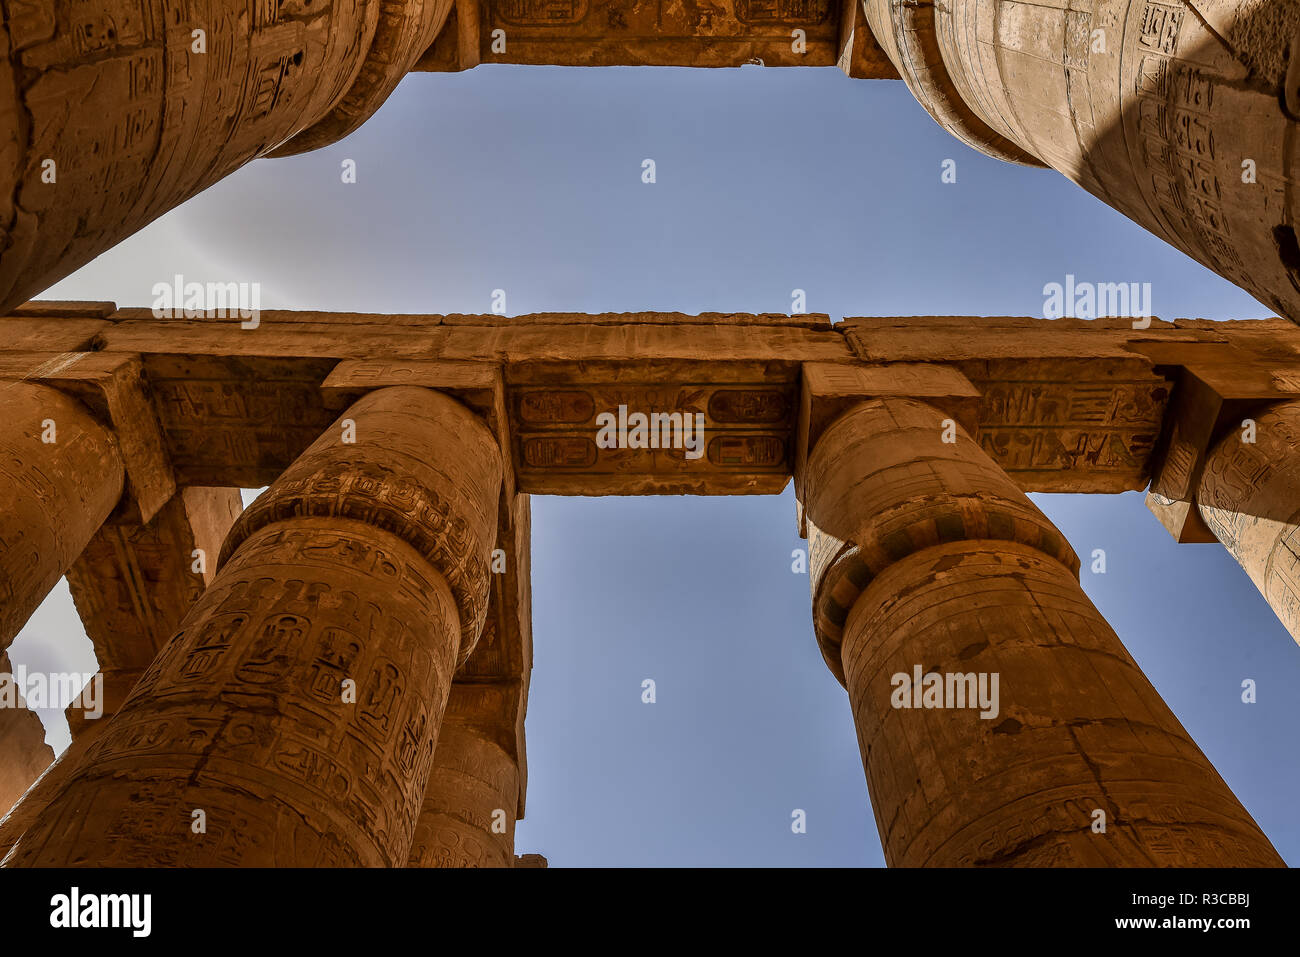 Columns and blue sky in the great hypostyle hall at the temple of Amon-Re in Karnak, Egypt, October 22, 2018 Stock Photo